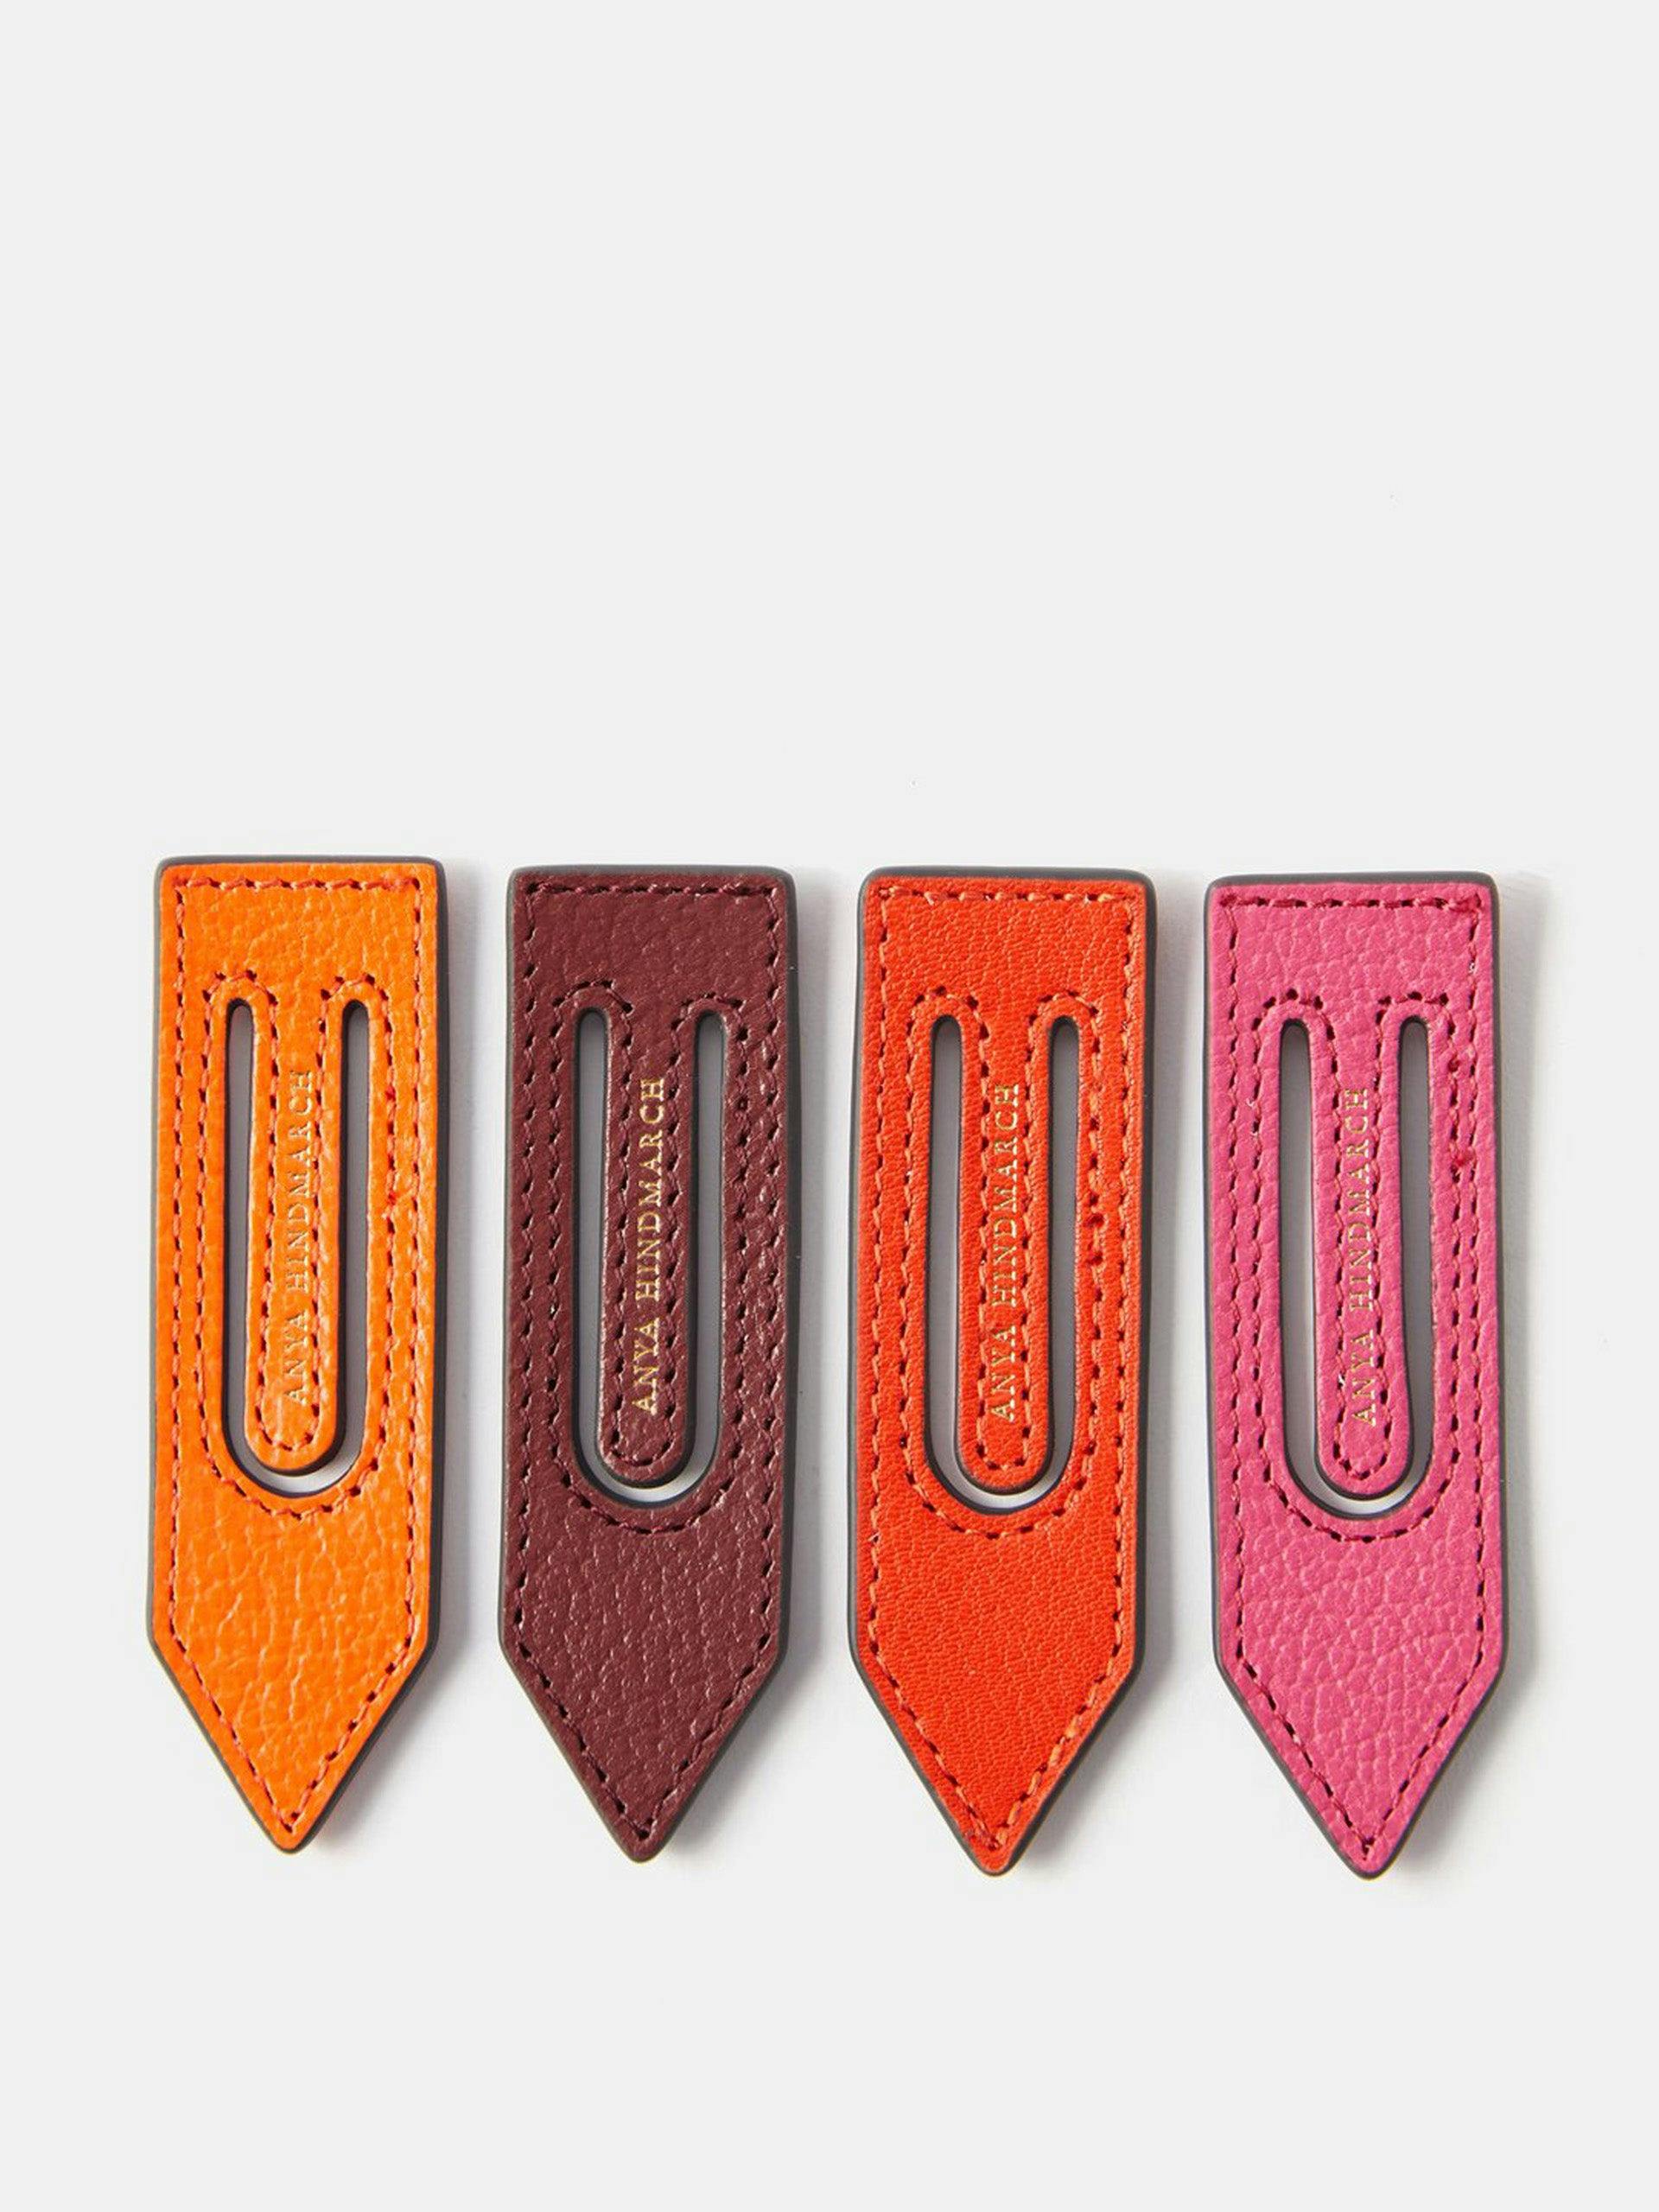 Leather bookmarks (set of 4)